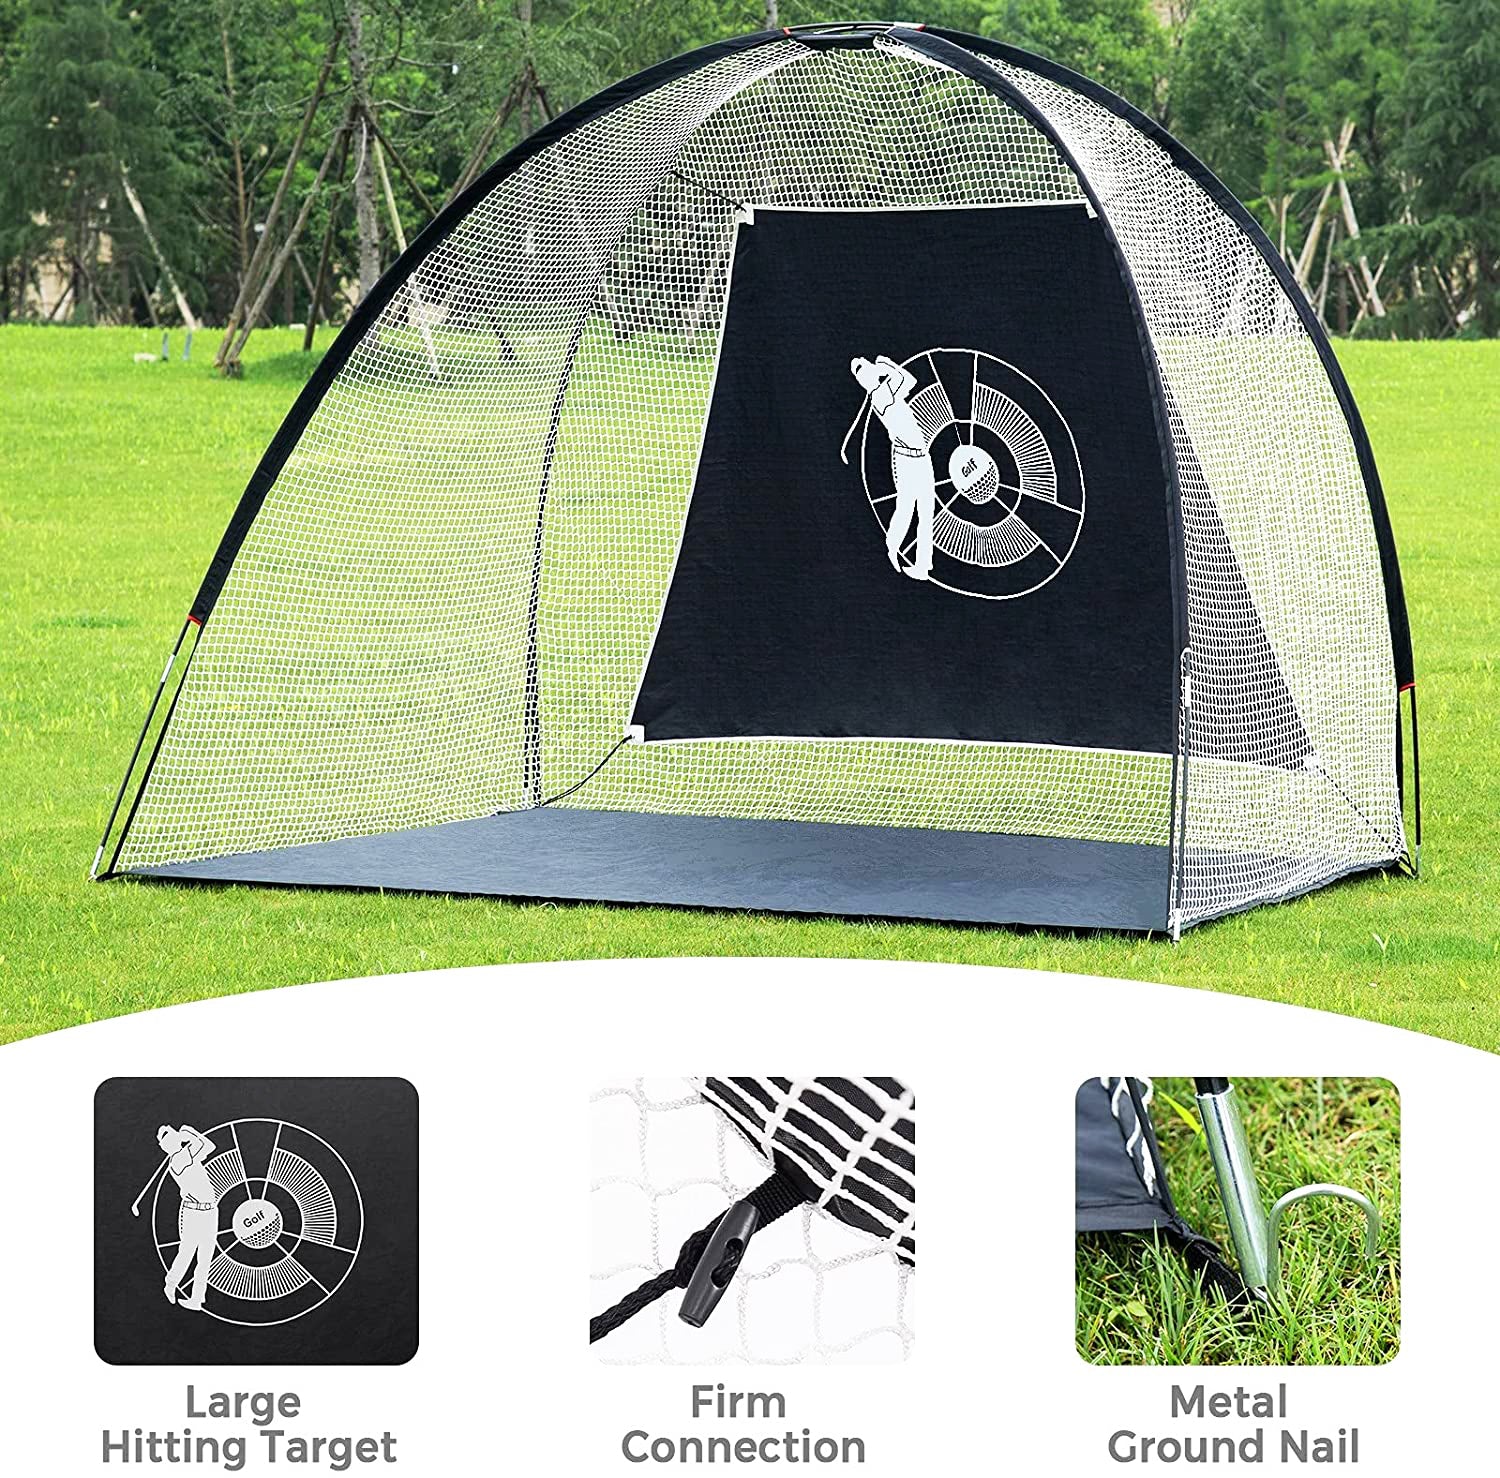 3-in-1 Portable 10 ft. Golf Practice Set